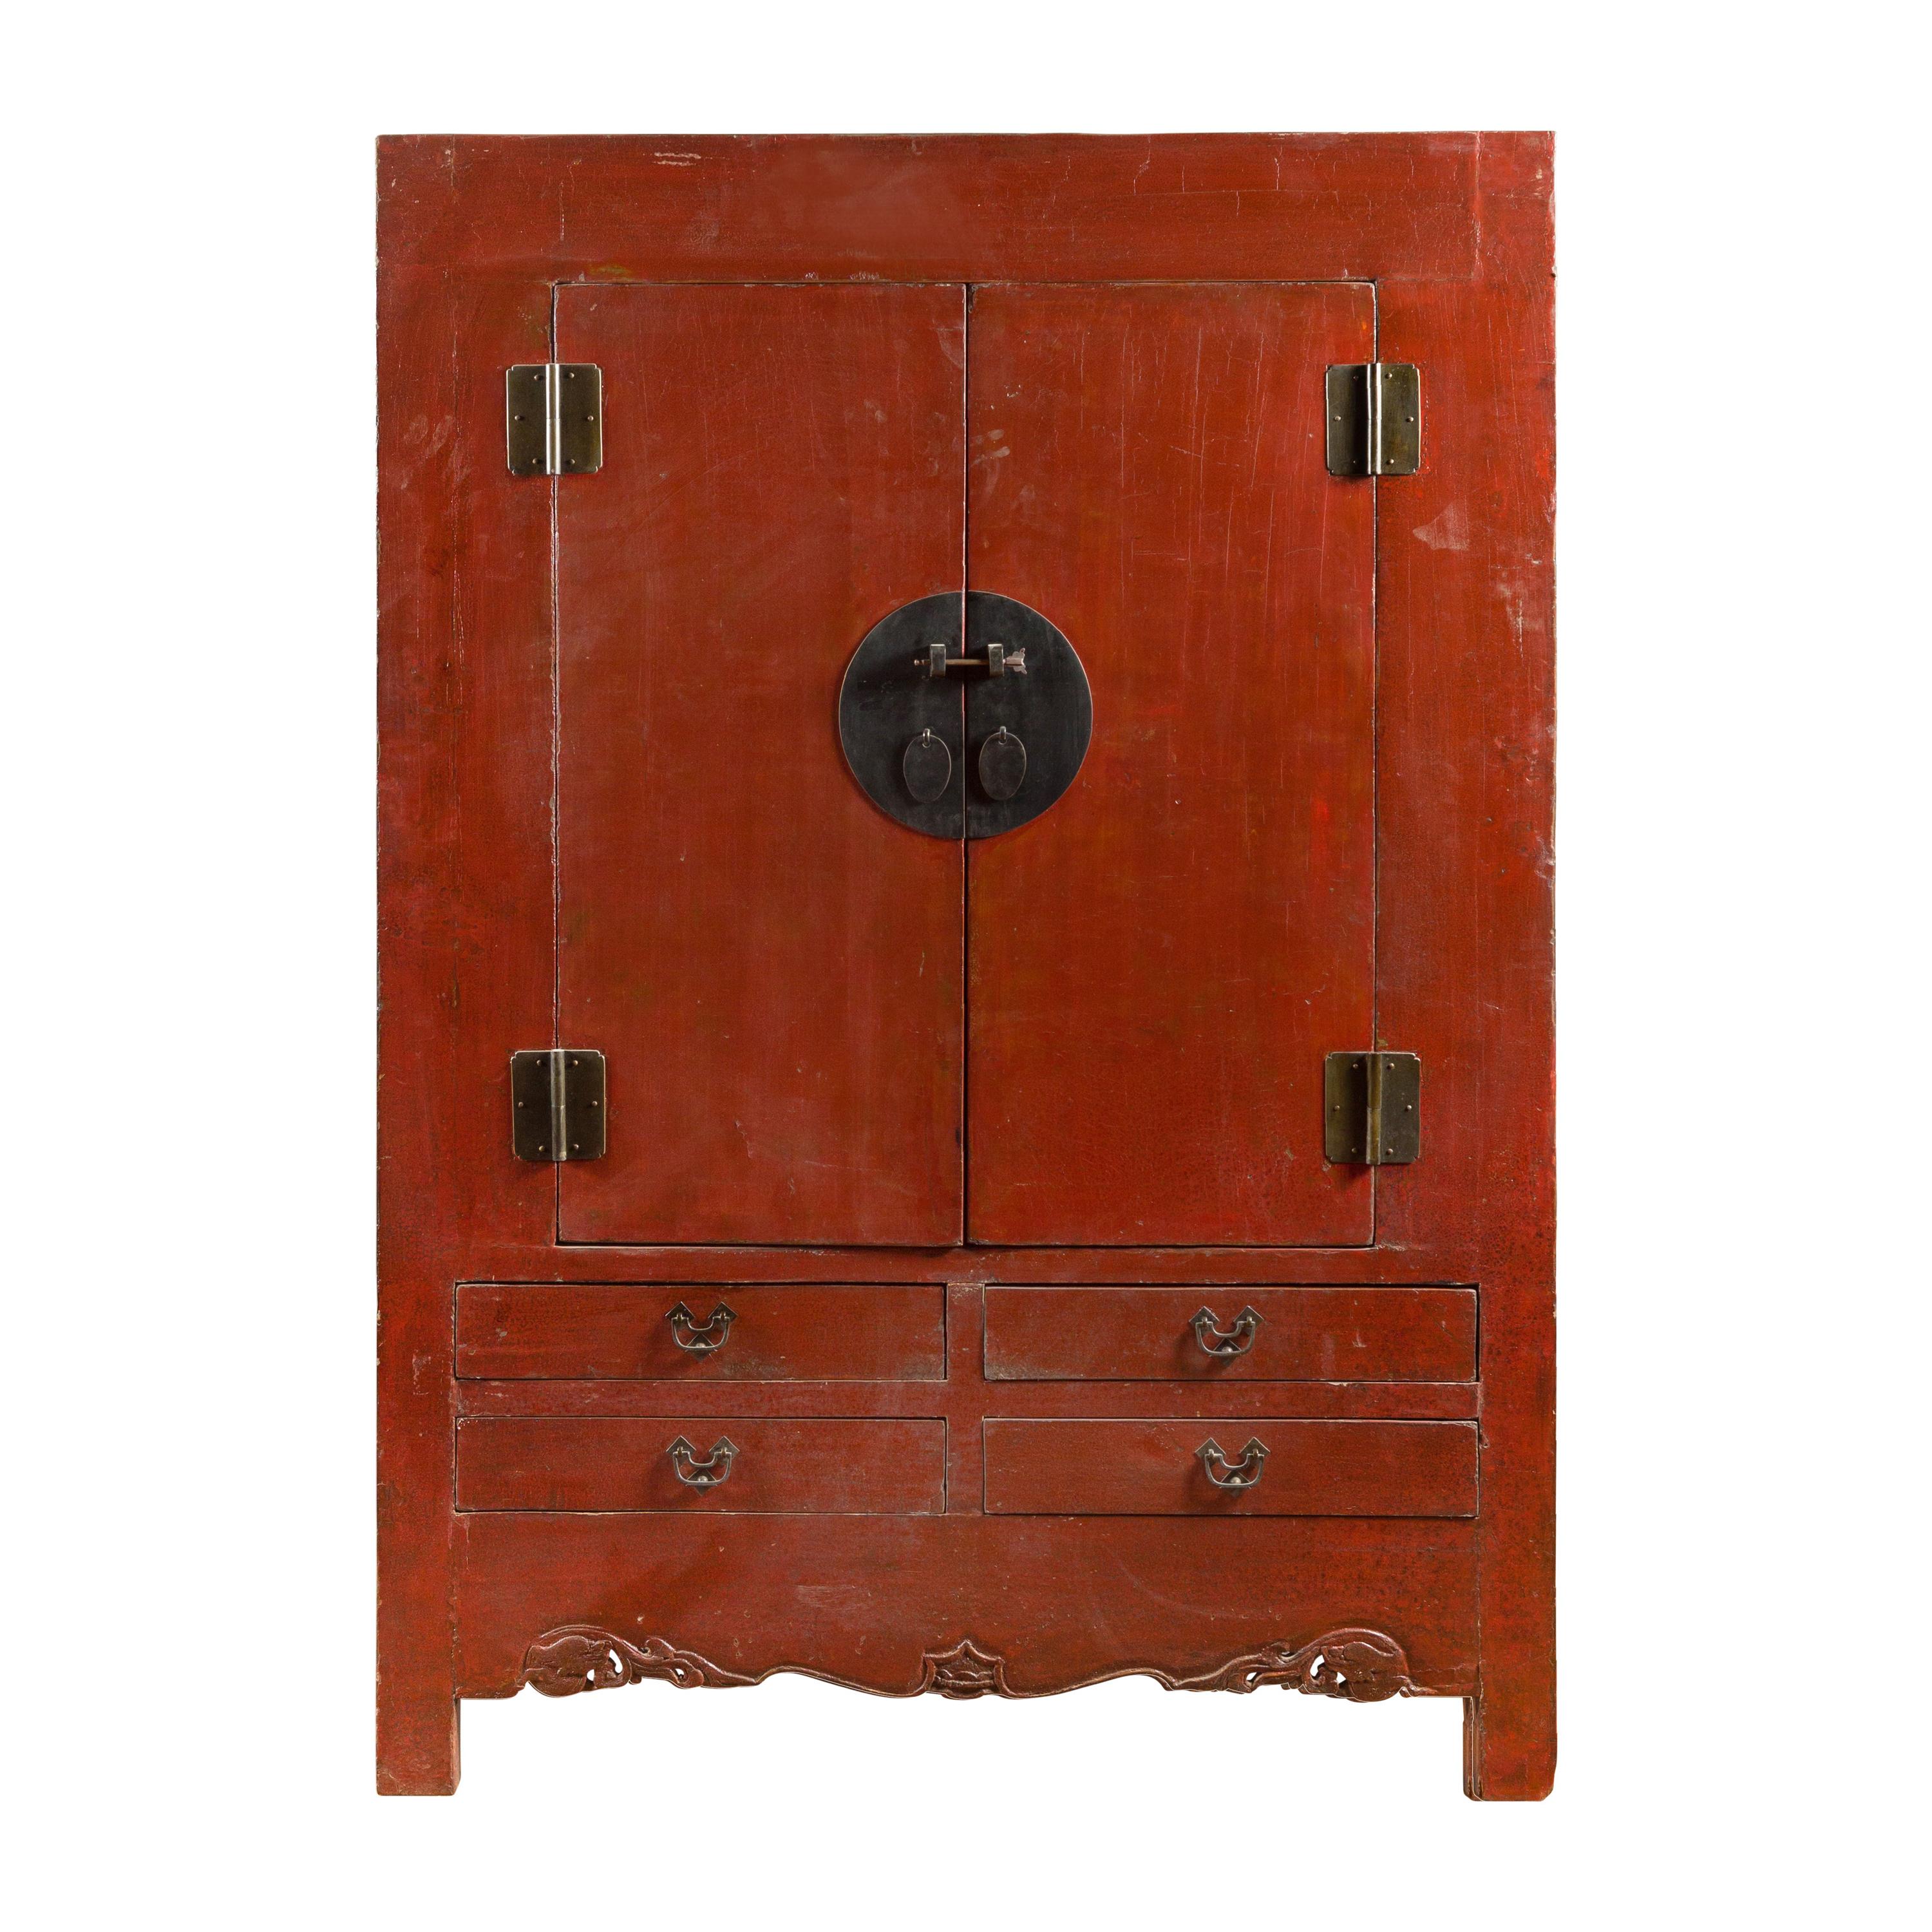 Chinese 19th Century Qing Dynasty Red Lacquer Cabinet with Medallion Hardware